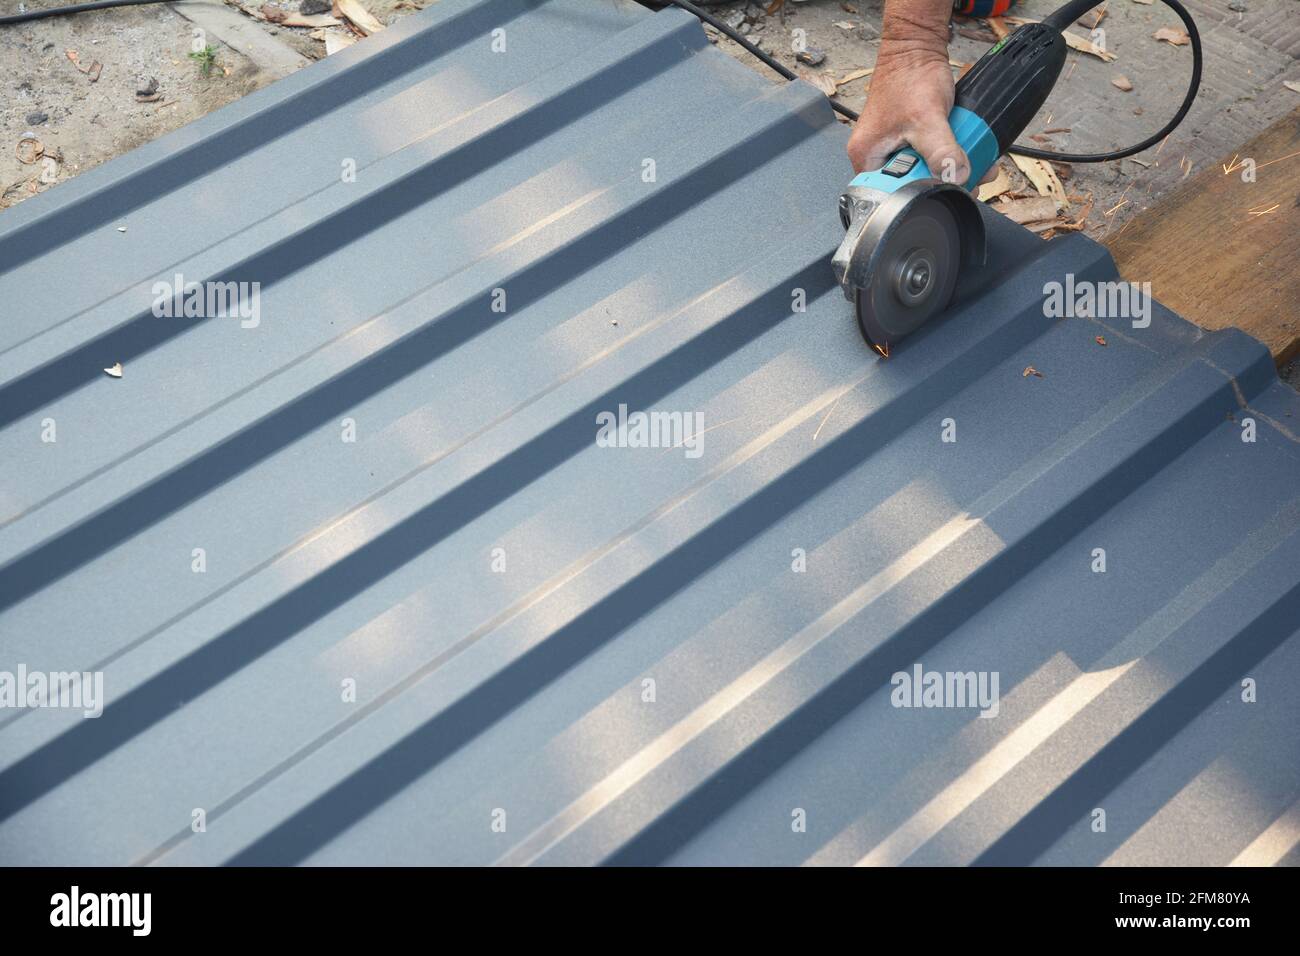 A roofer is cutting with a power angle grinder a corrugated metal roofing sheet, a metal roof tile. Stock Photo